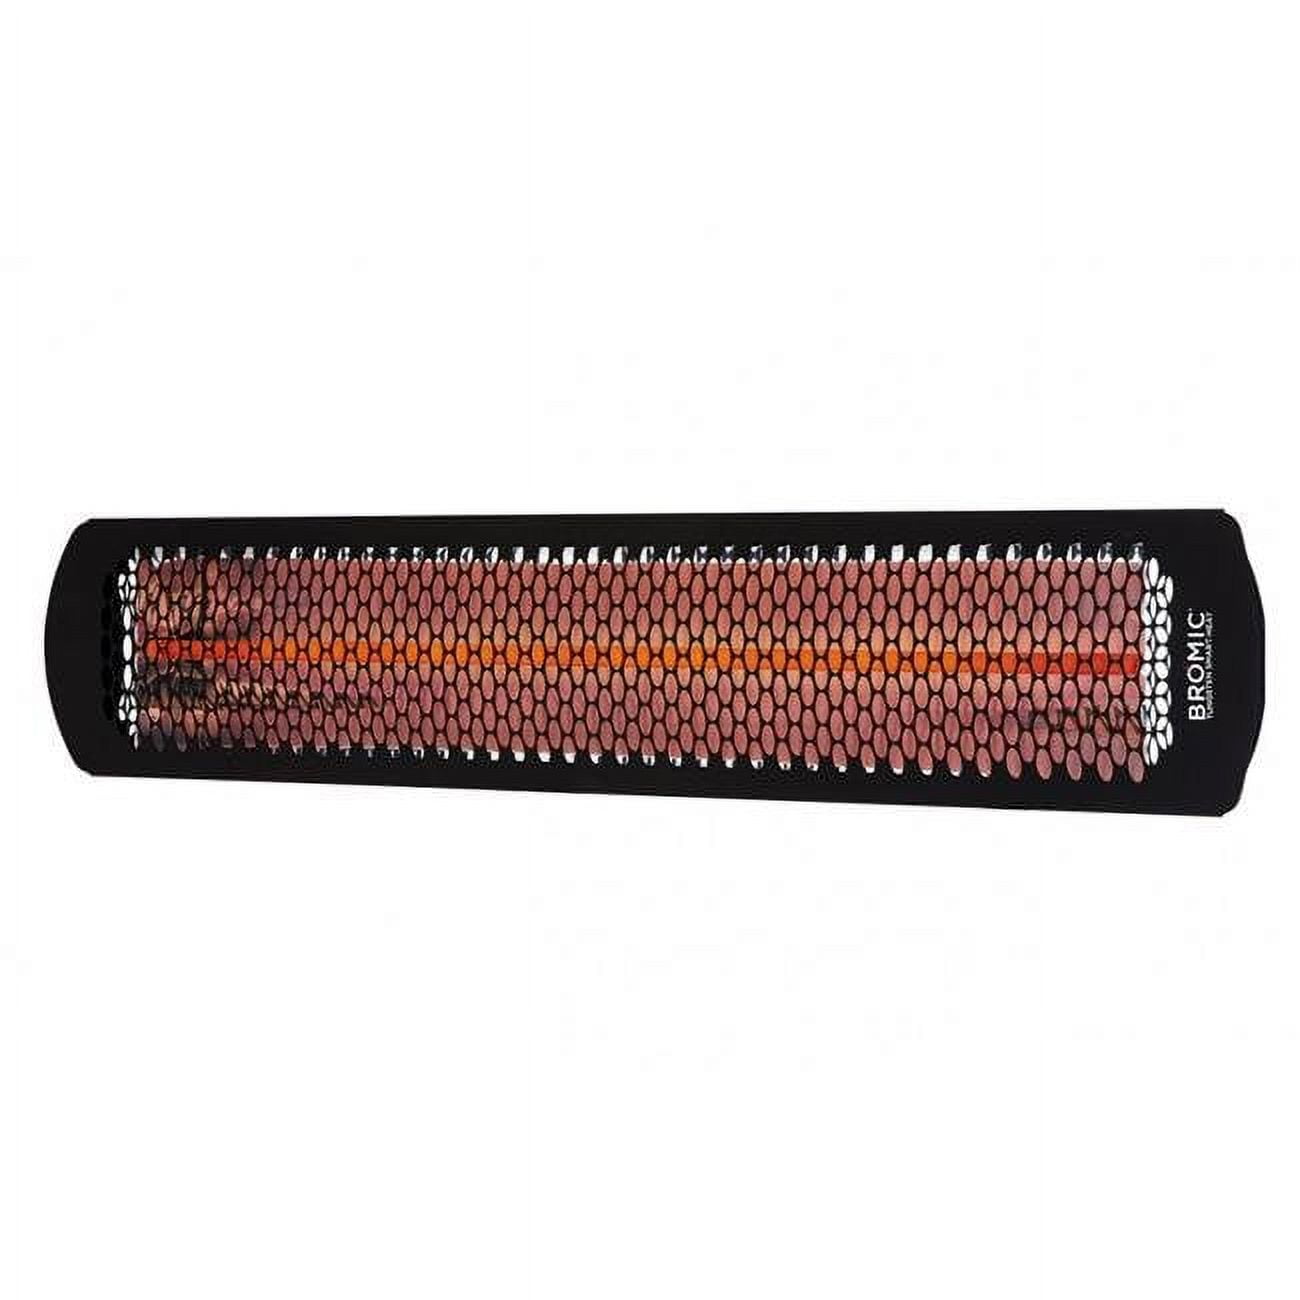 Picture of Bromic BH0420031 3000W Tungsten Smart Heat Electric Outdoor Patio Heater, Black